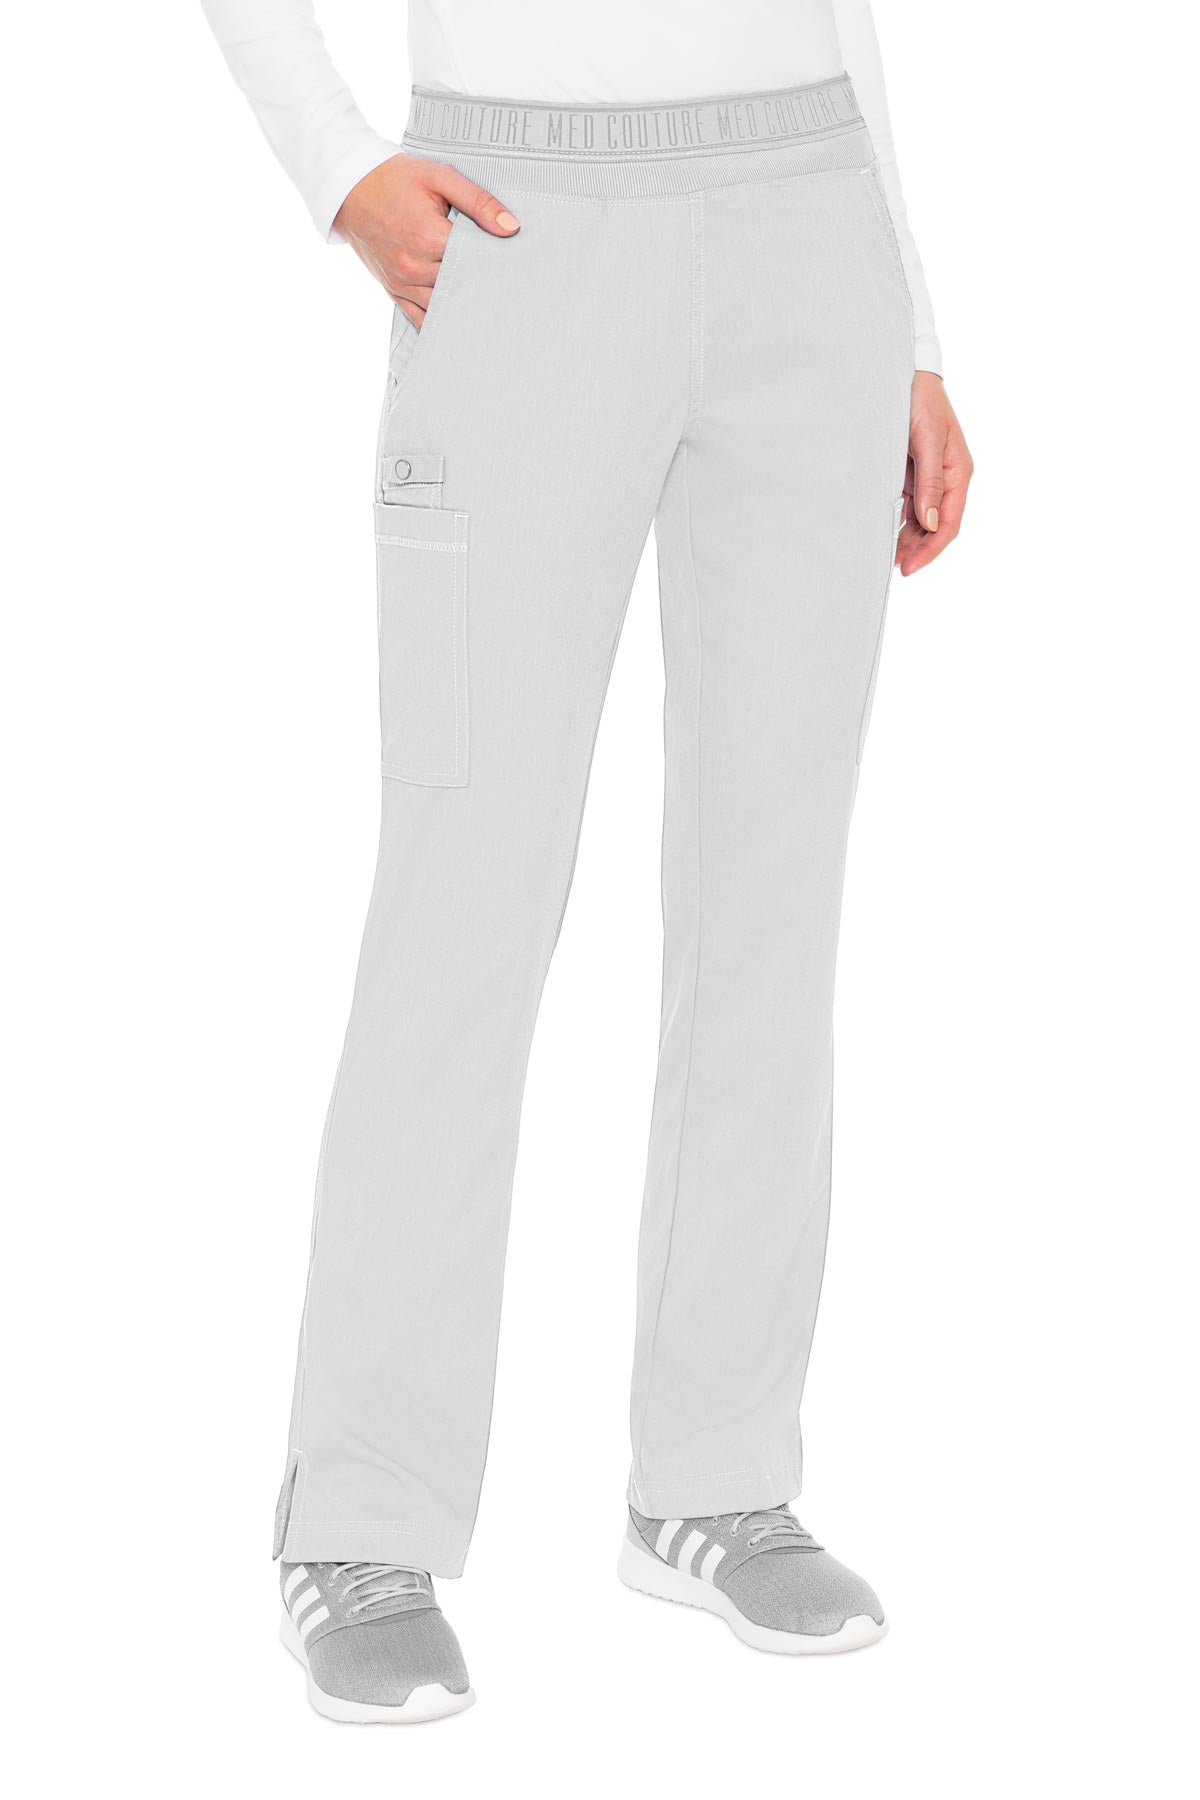 Med Couture White PANT